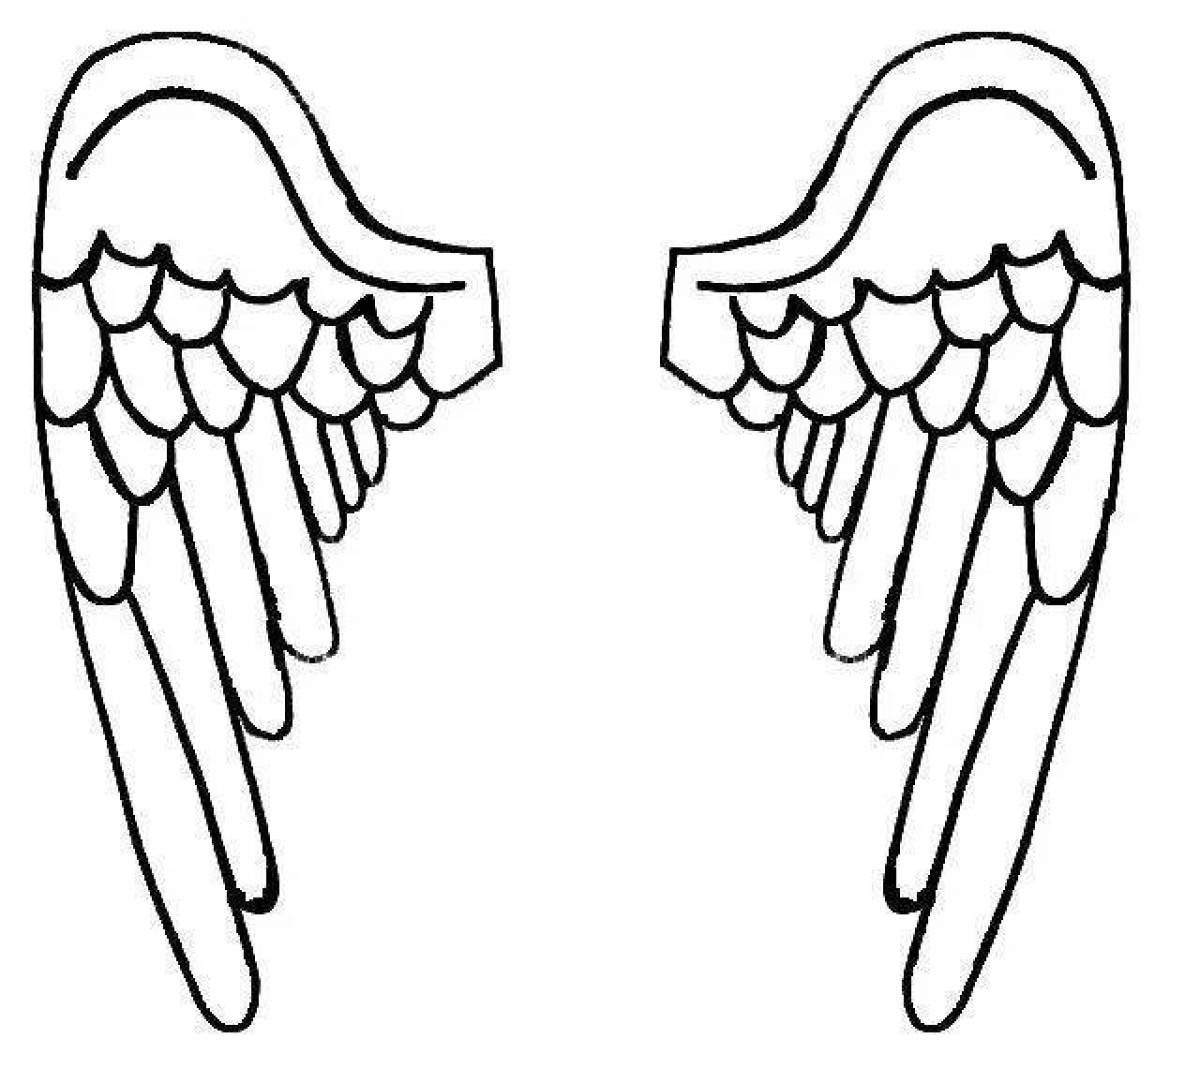 Glowing angel wings coloring page